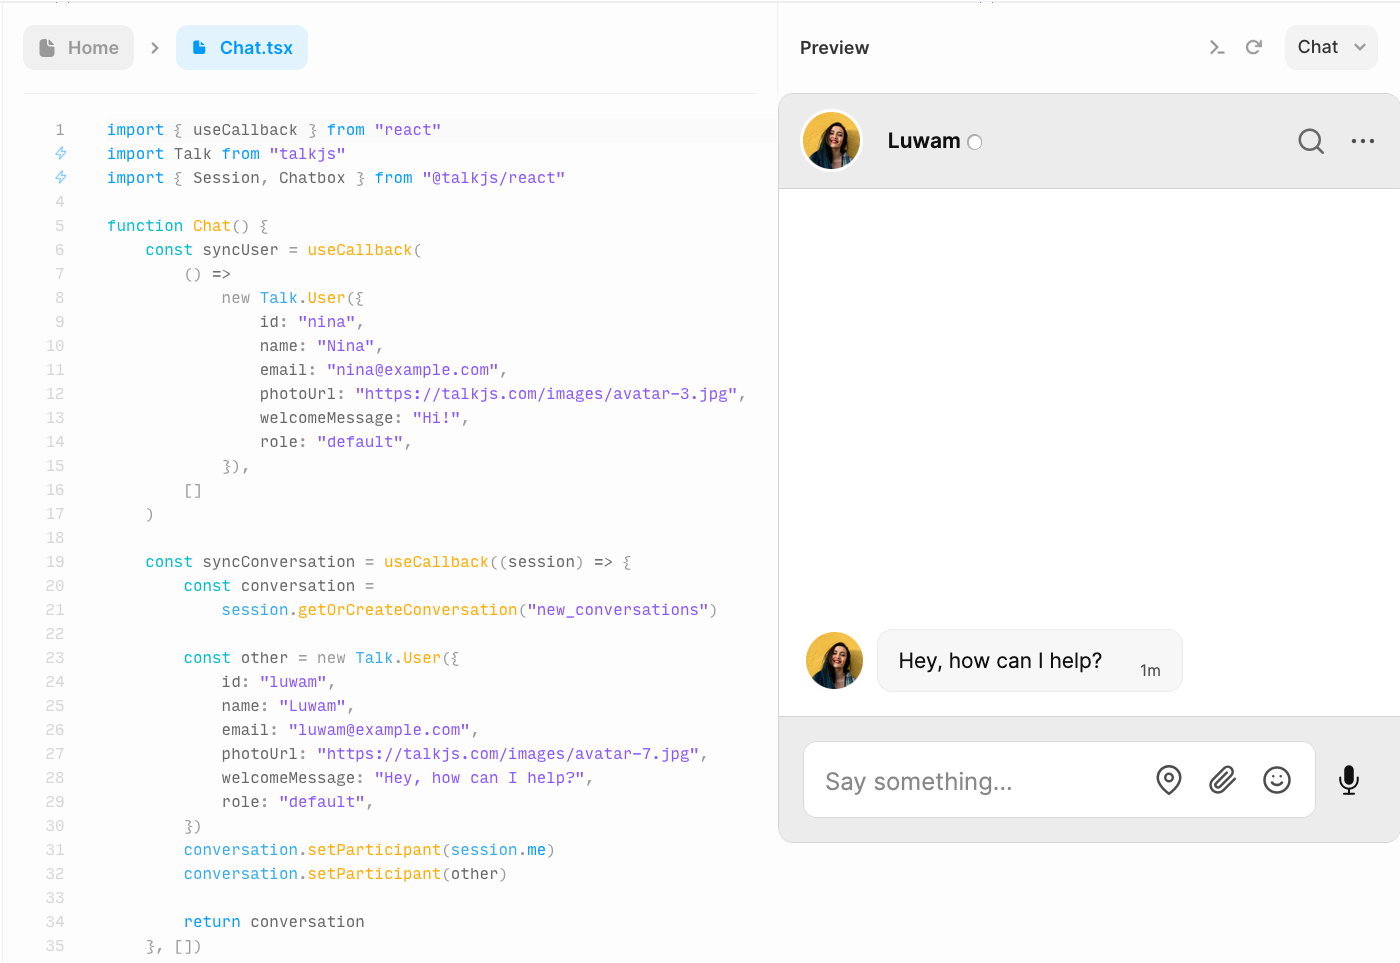 Overview of editing a code component in a Framer project. On the left is an opened code editor for the Chat.tsx file, with a code snippet to integrate TalkJS chat into Framer. On the right is a preview of the Chat code component. The chat window shows a conversation with Luwam, who asks: ‘Hey, how can I help?’.